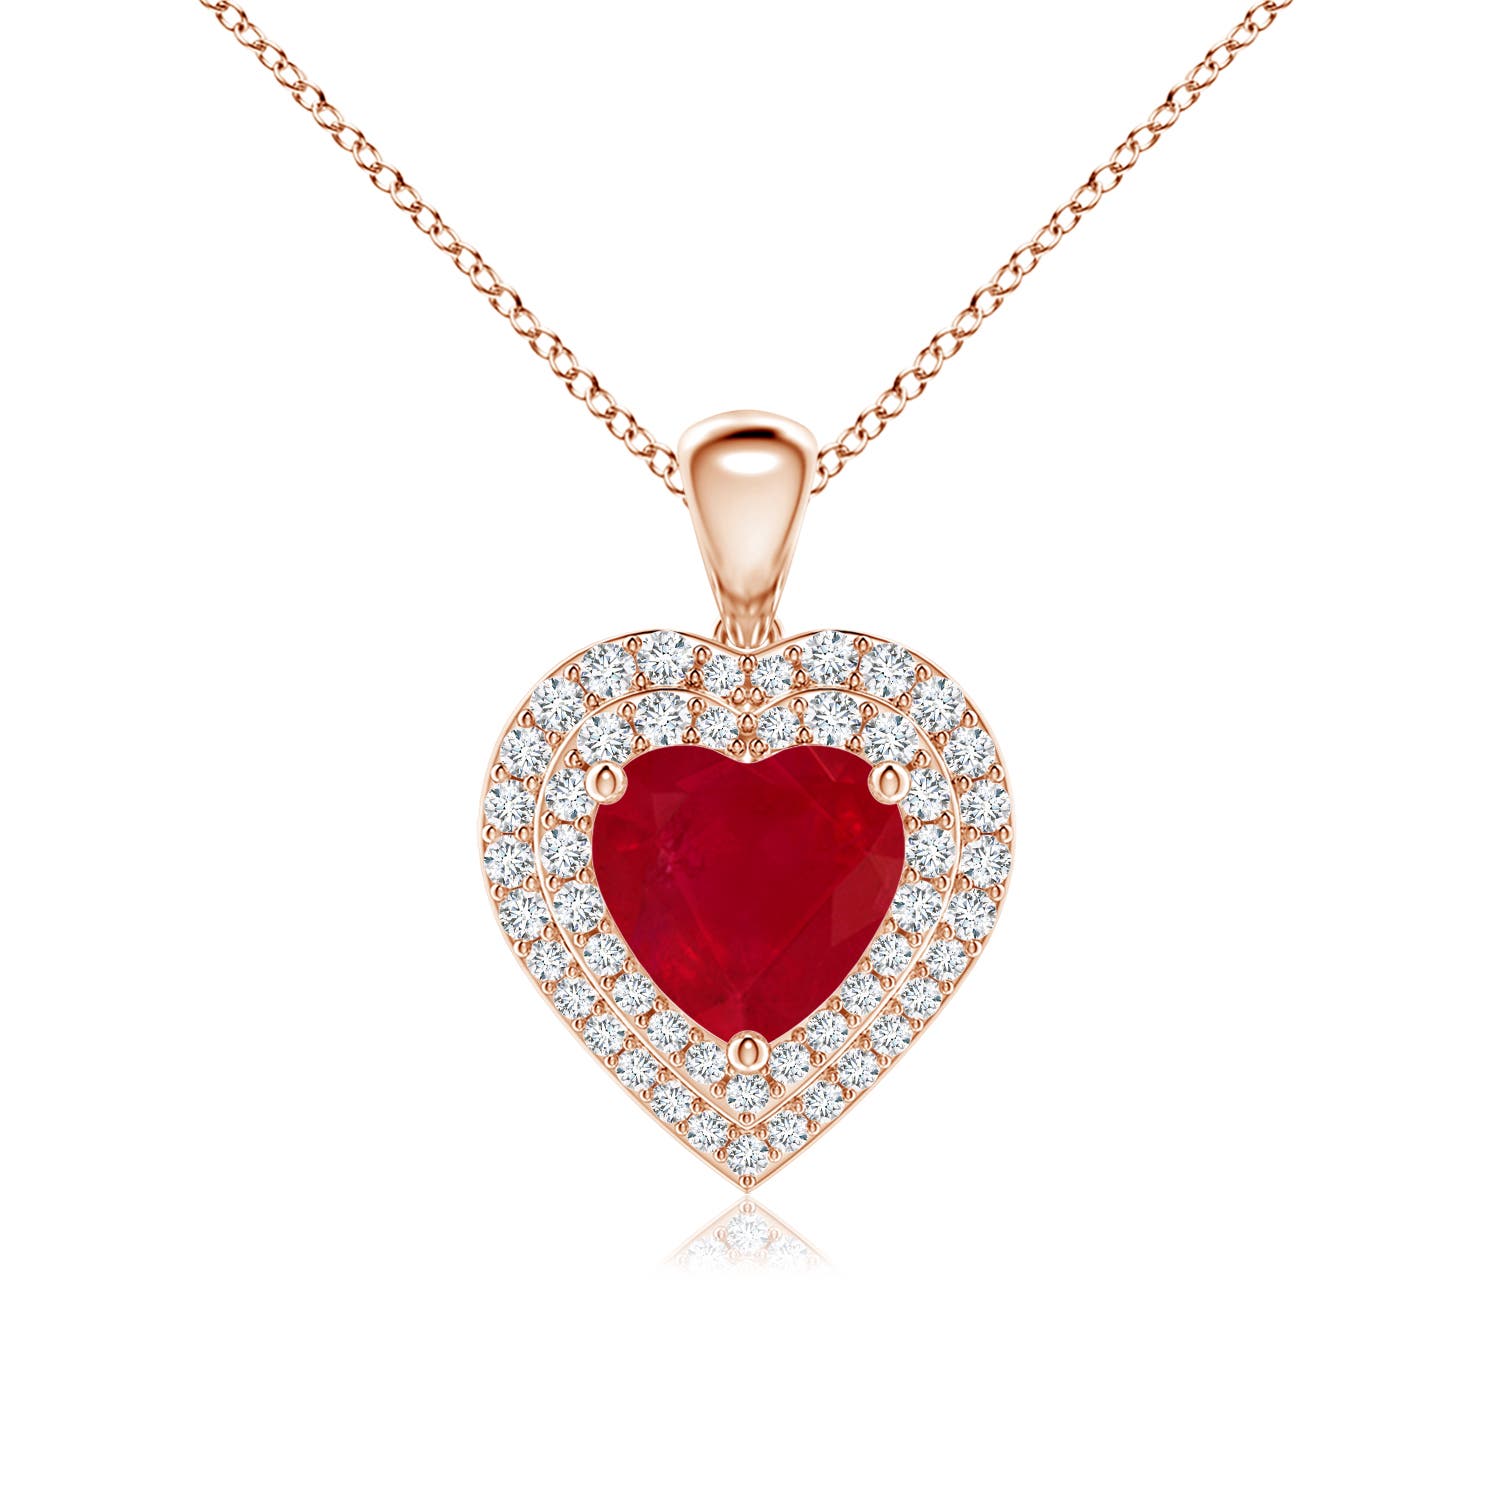 AA - Ruby / 2.08 CT / 14 KT Rose Gold